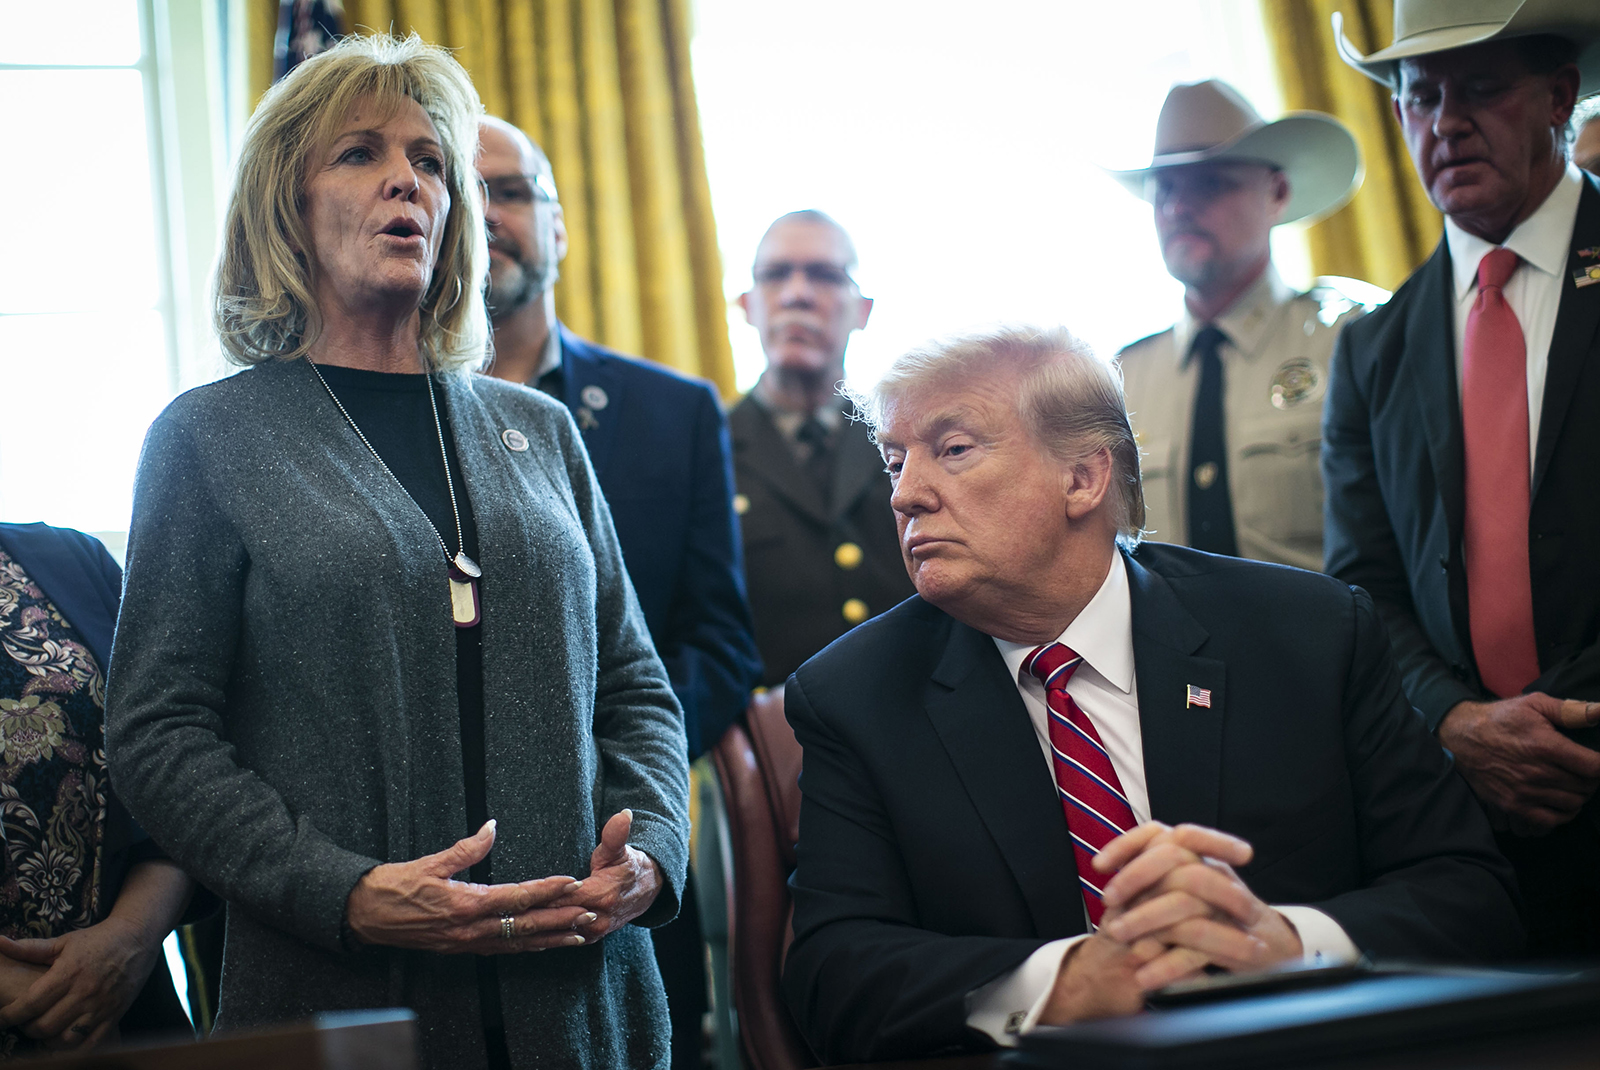 In this March 15, 2019 file photo, Immigration Reform Advocate Mary Ann Mendoza speaks as President Donald Trump listens during a veto signing in the Oval Office of the White House in Washington.